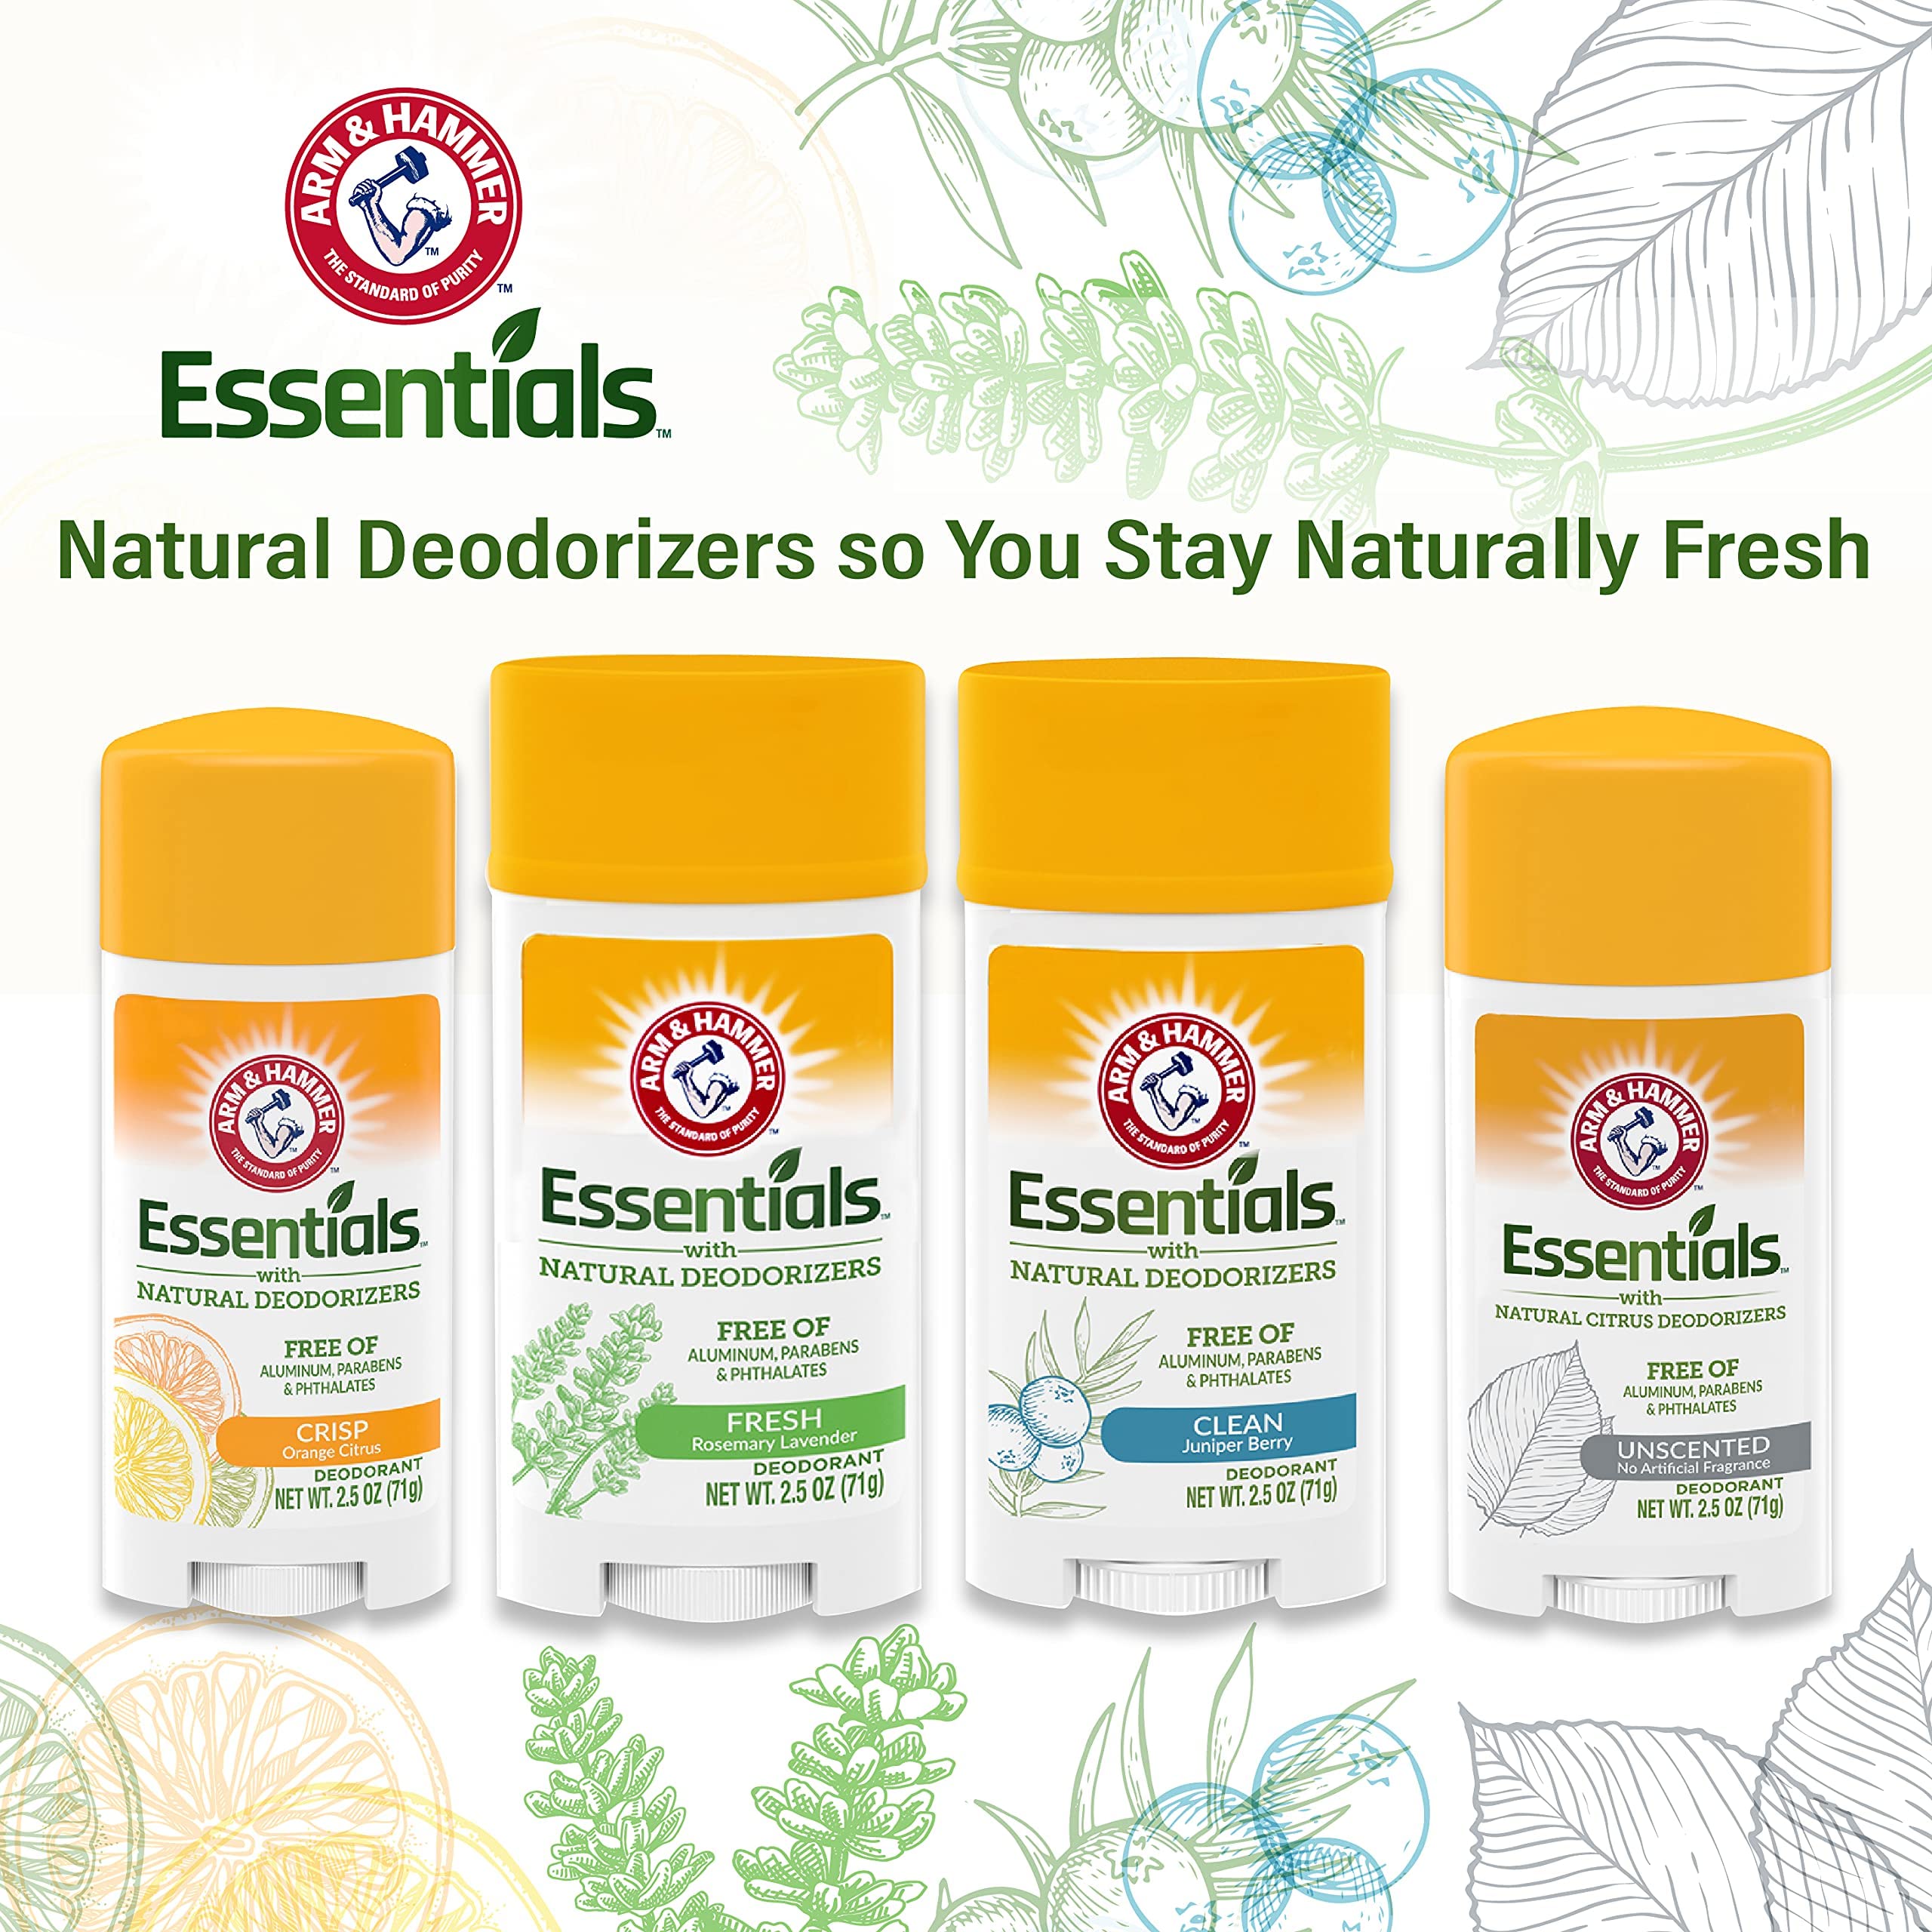 ARM & HAMMER Essentials Deodorant- Unscented- Solid Oval- Made with Natural Deodorizers- Free From Aluminum, Parabens & Phthalates, 2.5 Oz